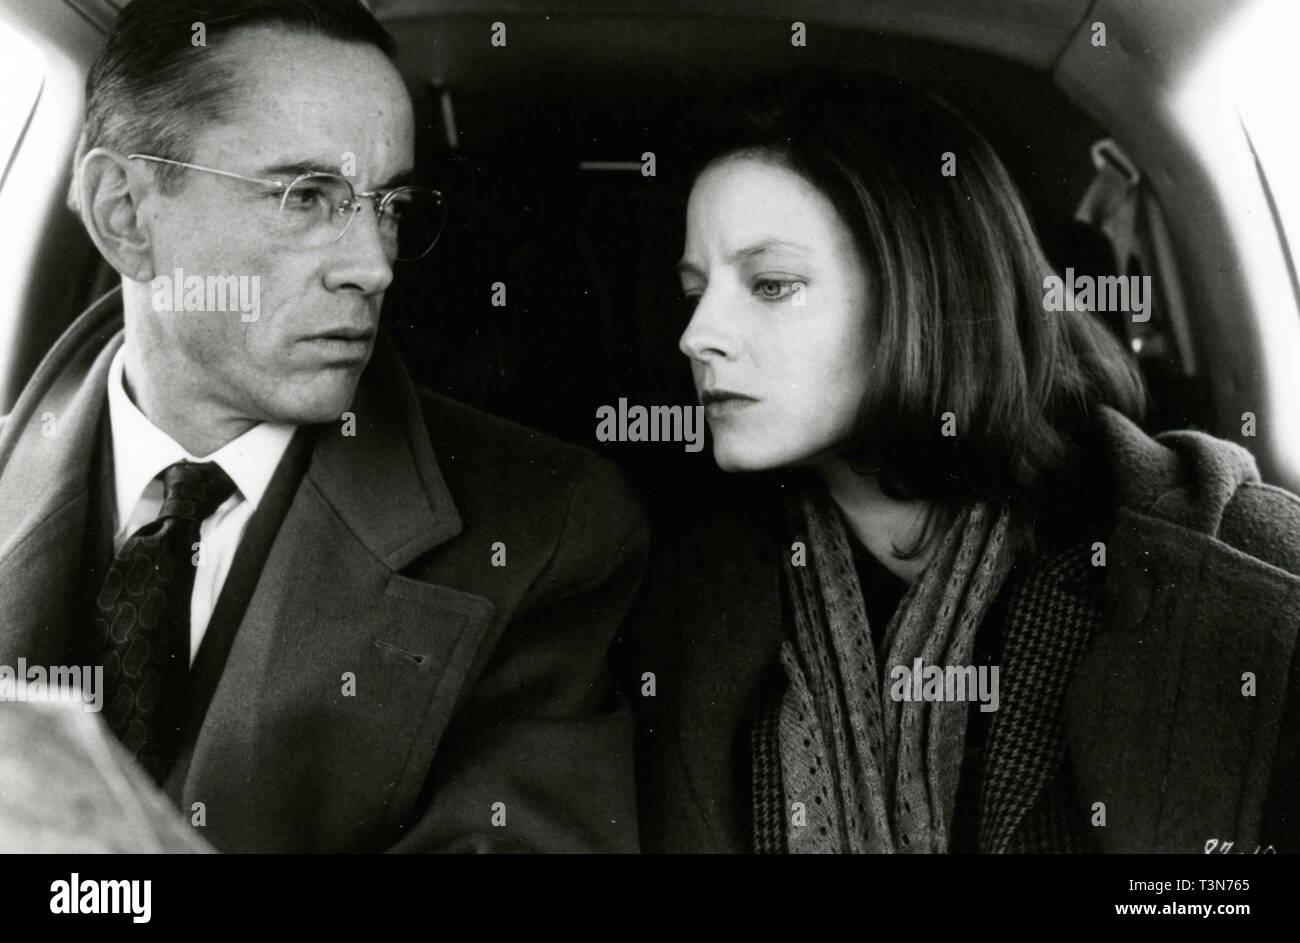 Scott Glenn and Jodie Foster in the movie The Silence of the Lambs, 1991 Stock Photo